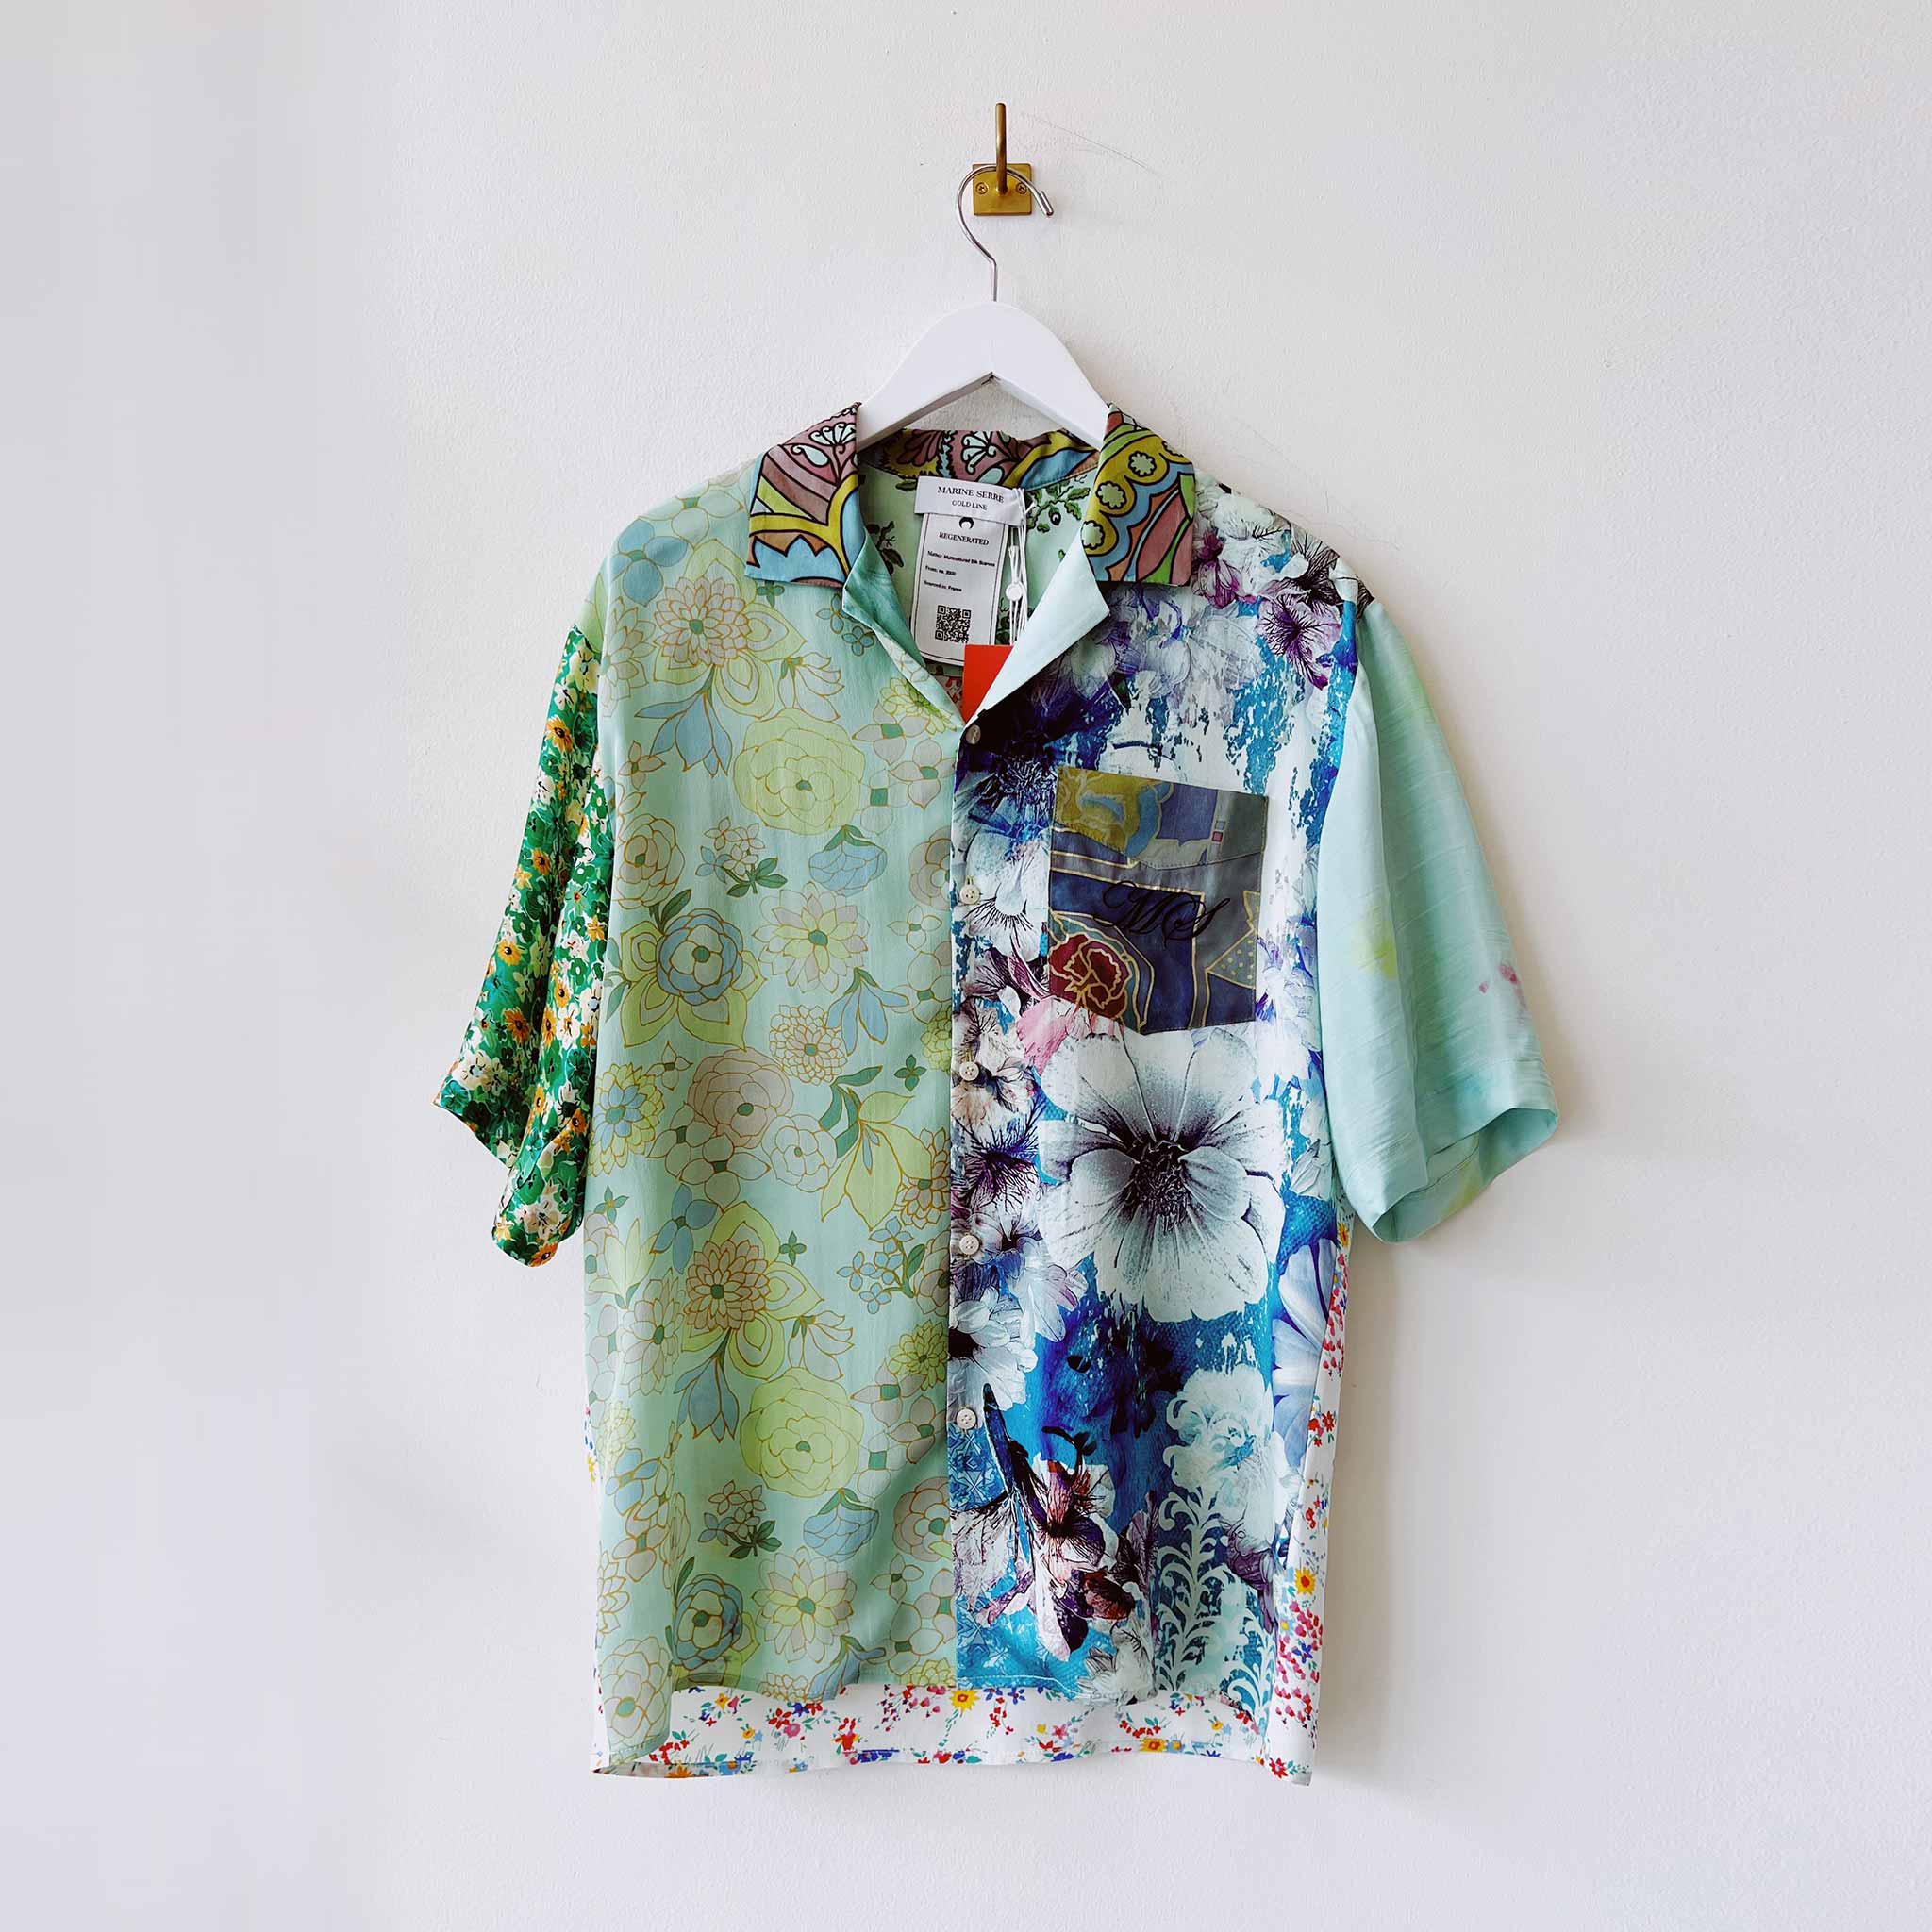 A silk bowling shirt created from multiple vintage scarves and overdyed in a seafoam green - front photo of XS shirt.